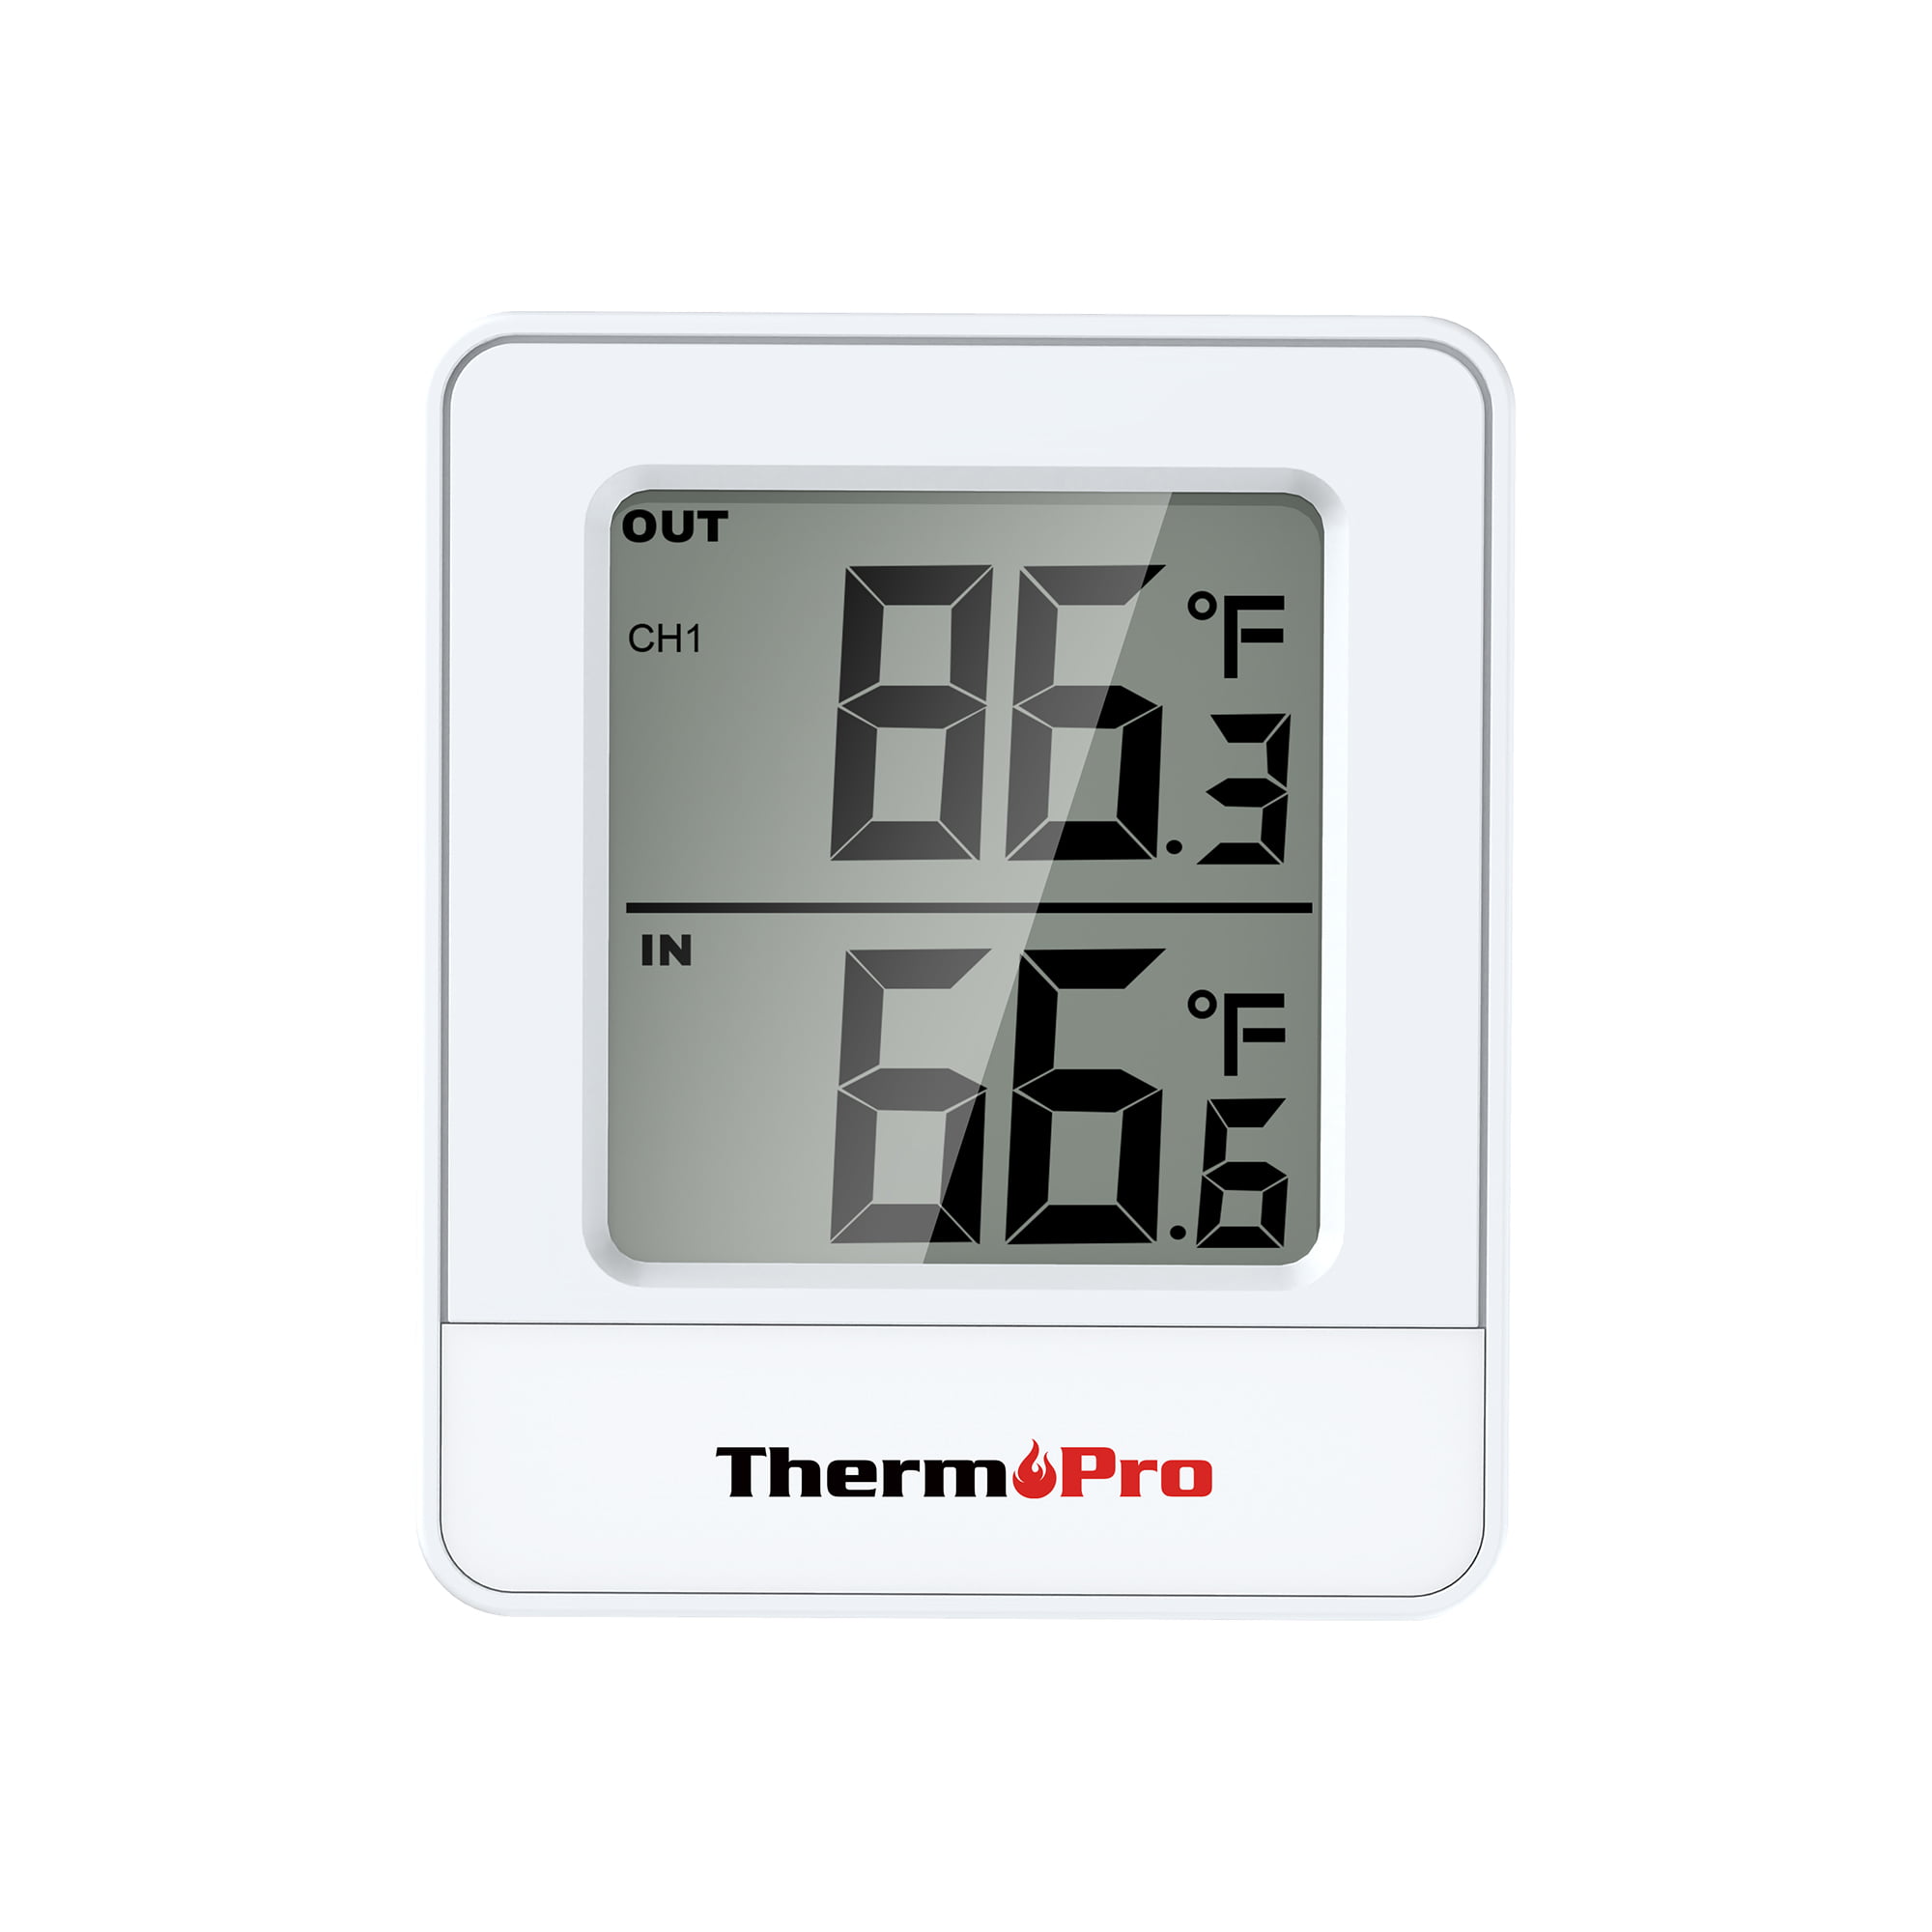 ThermoPro TP62 Indoor Outdoor Thermometer Wireless Weather Hygrometer,  500ft/150m Range Temperature Humidity Sensor, Backlight Indoor Room  Thermometer